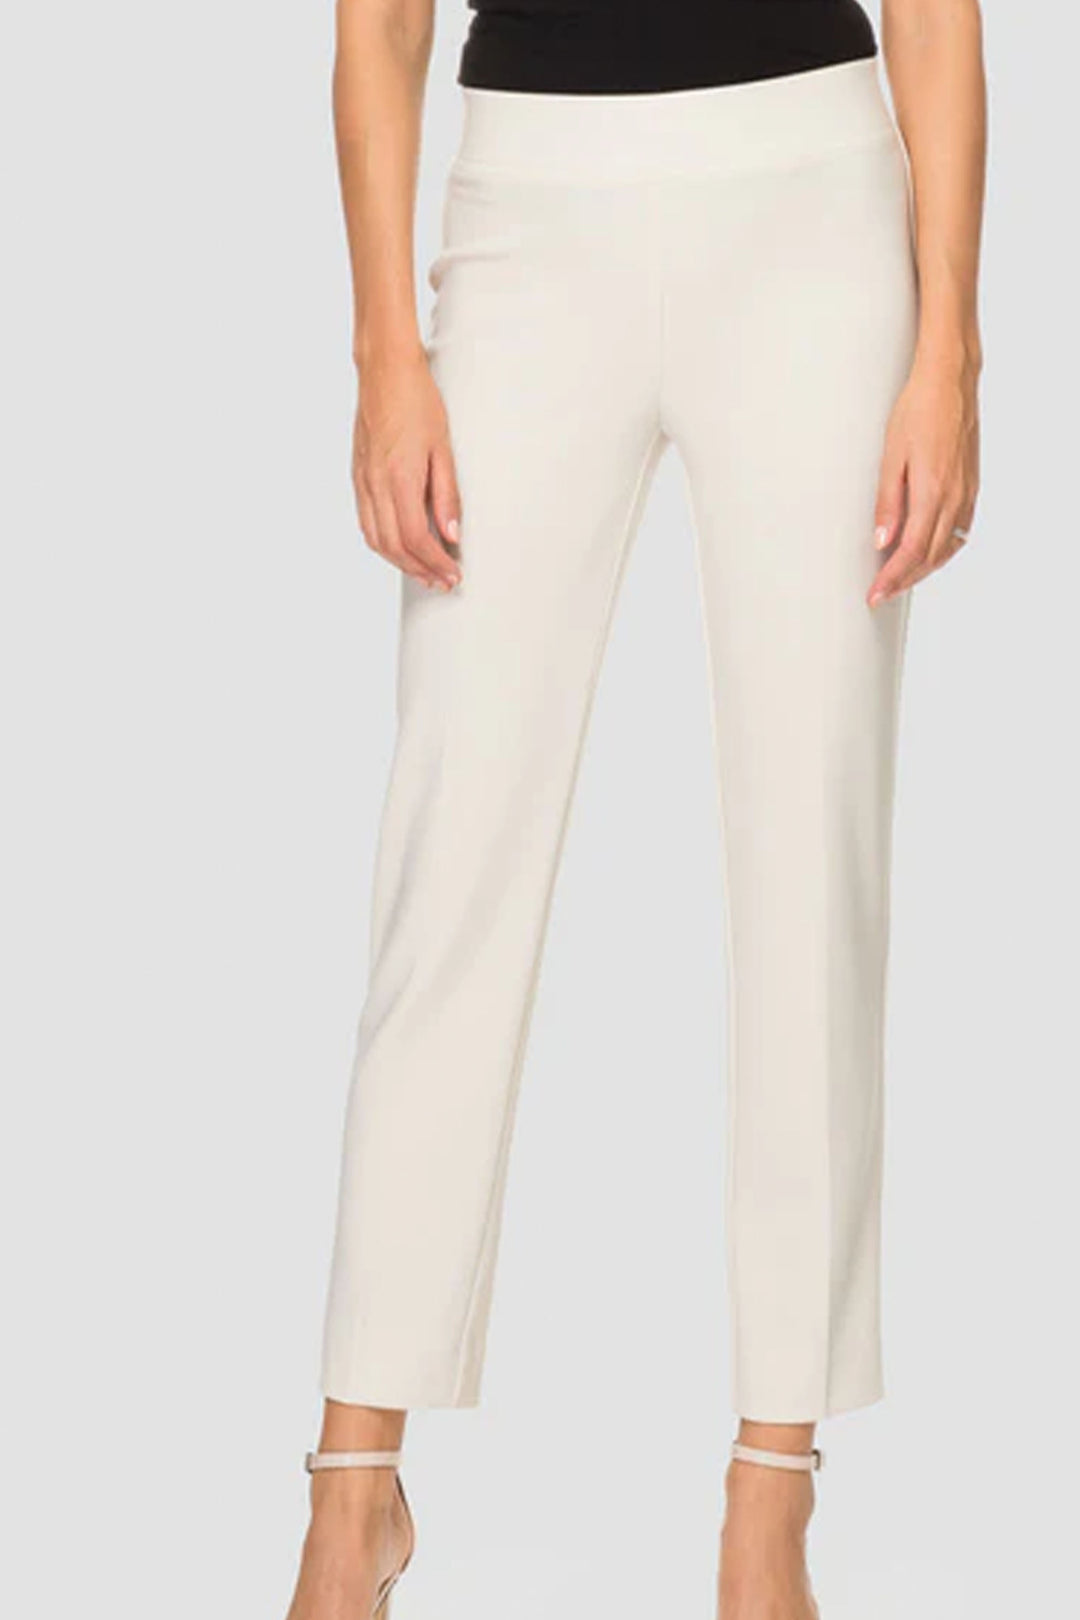 Joseph Ribkoff women's business casual slim fit basic pull-on pant - champagne